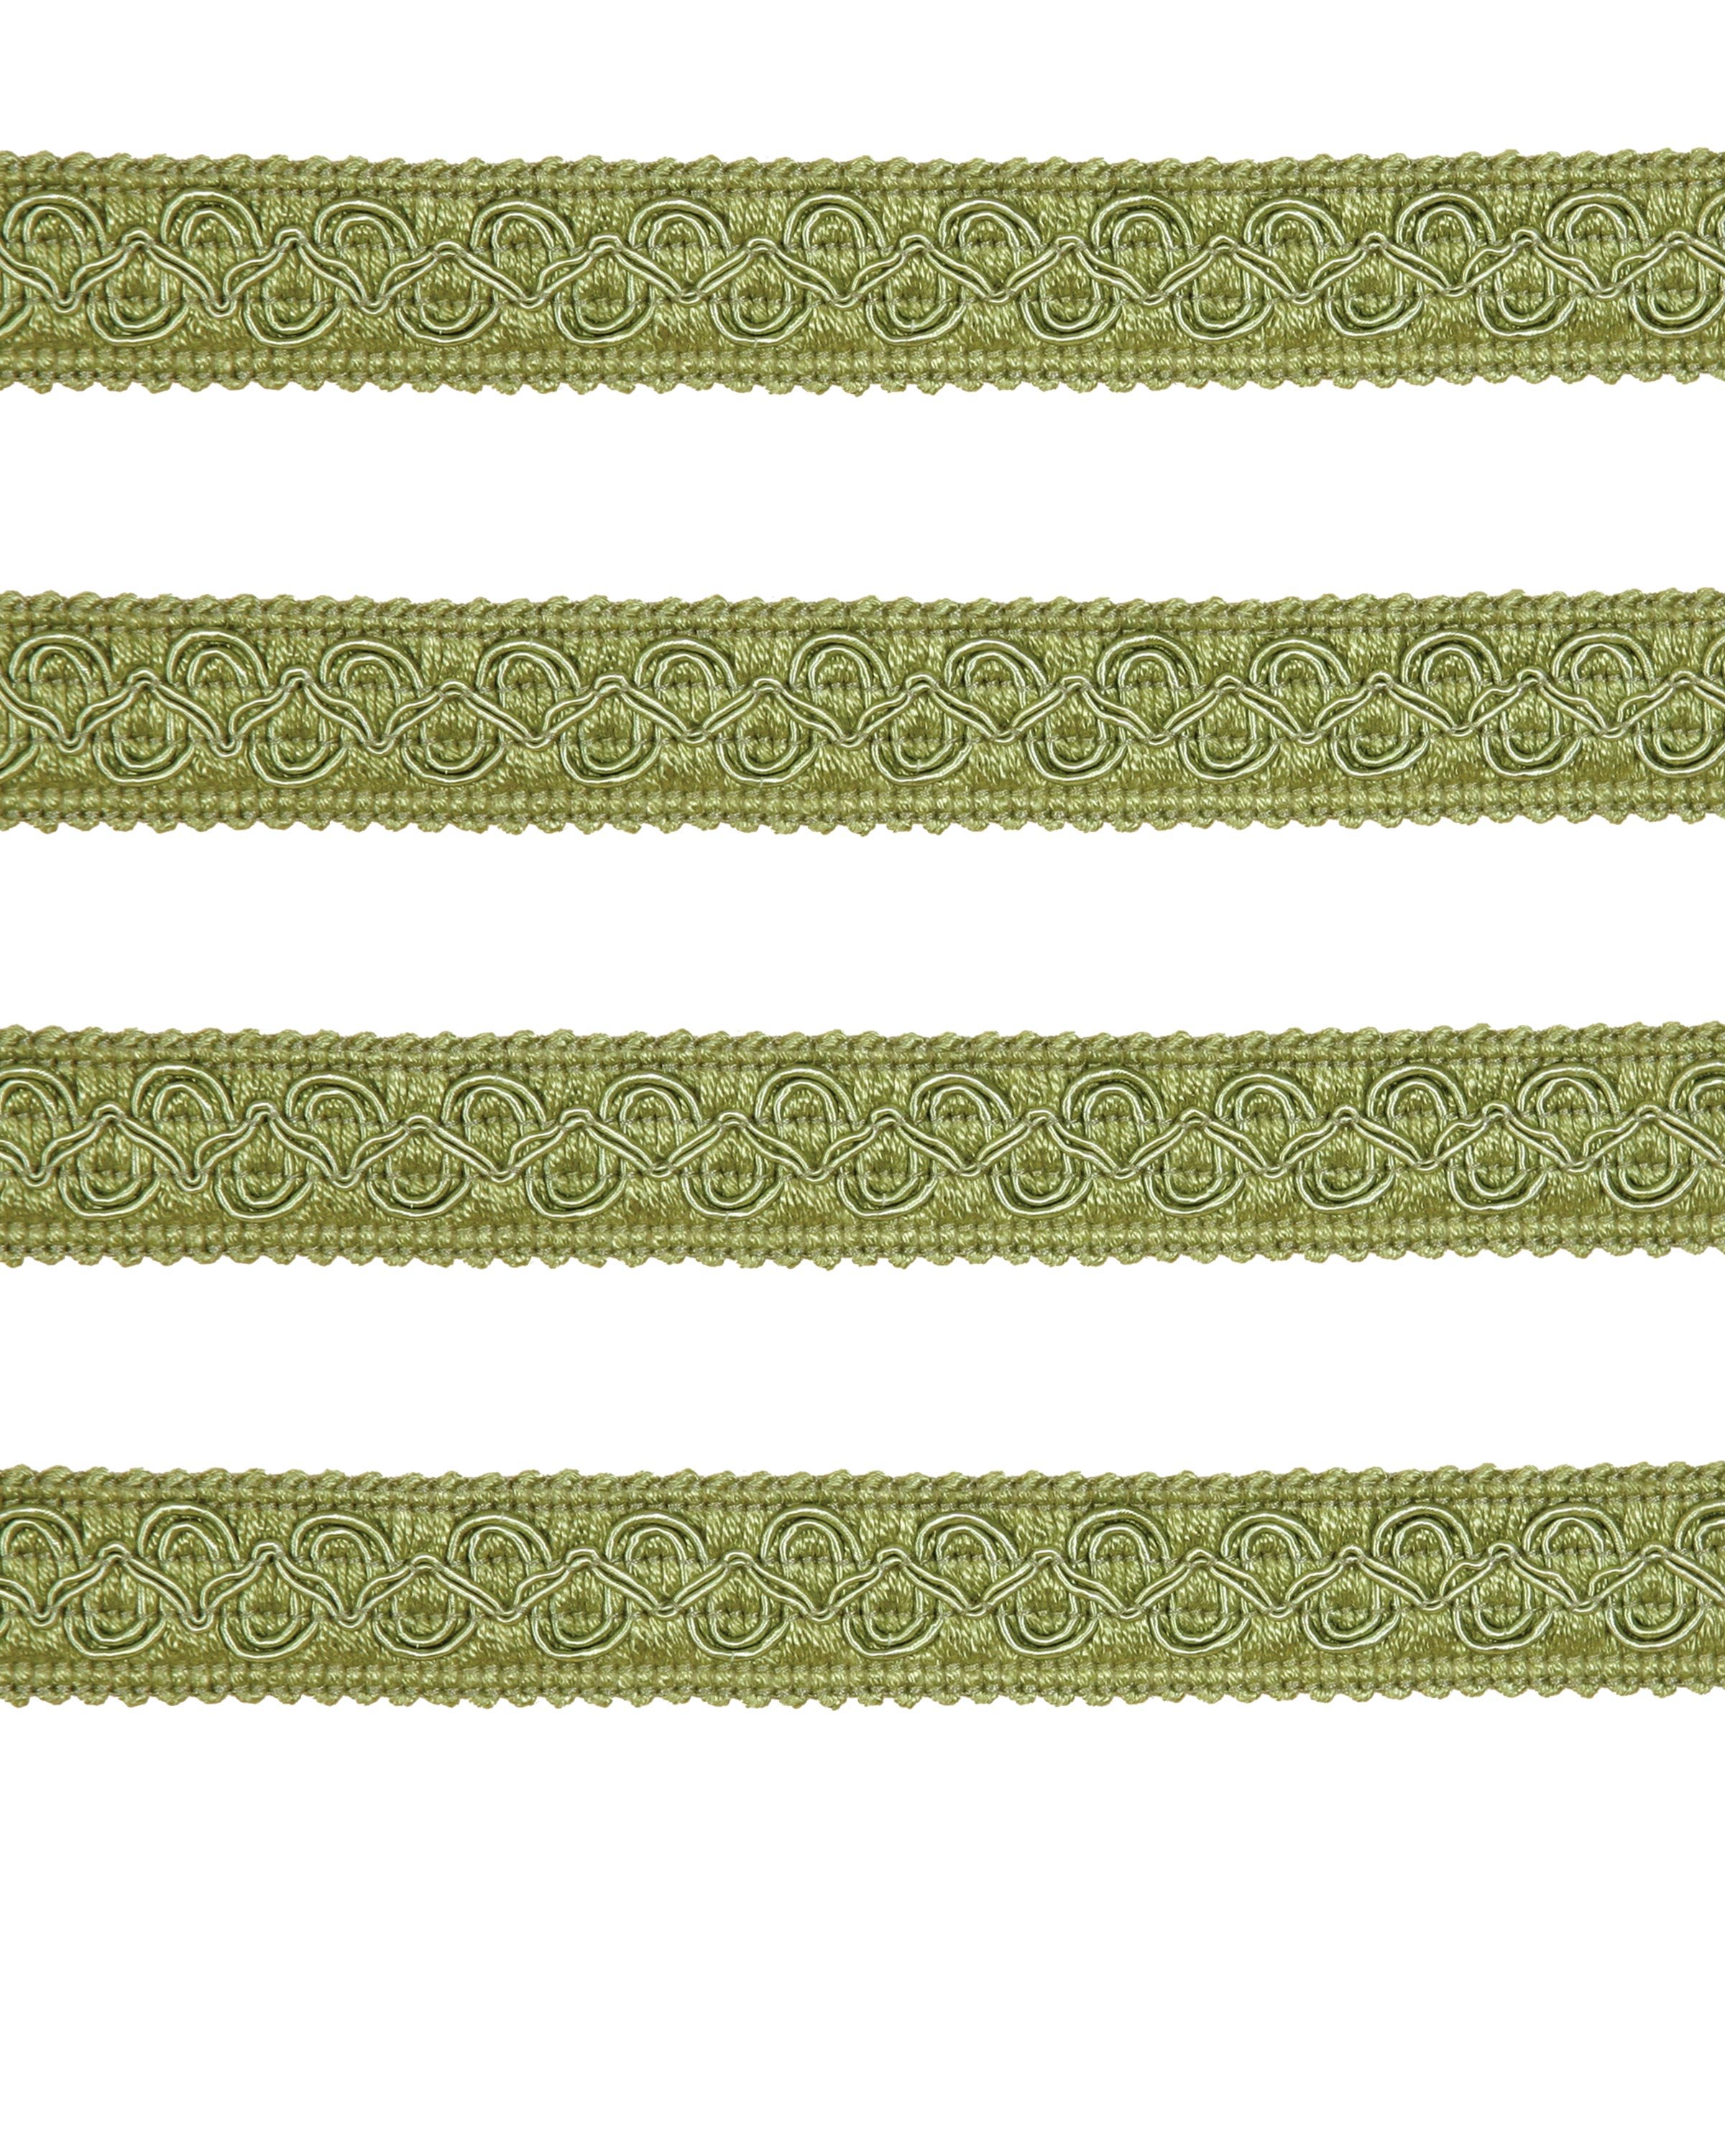 Fancy Braid - Antique Green 21mm Price is for 5 metres